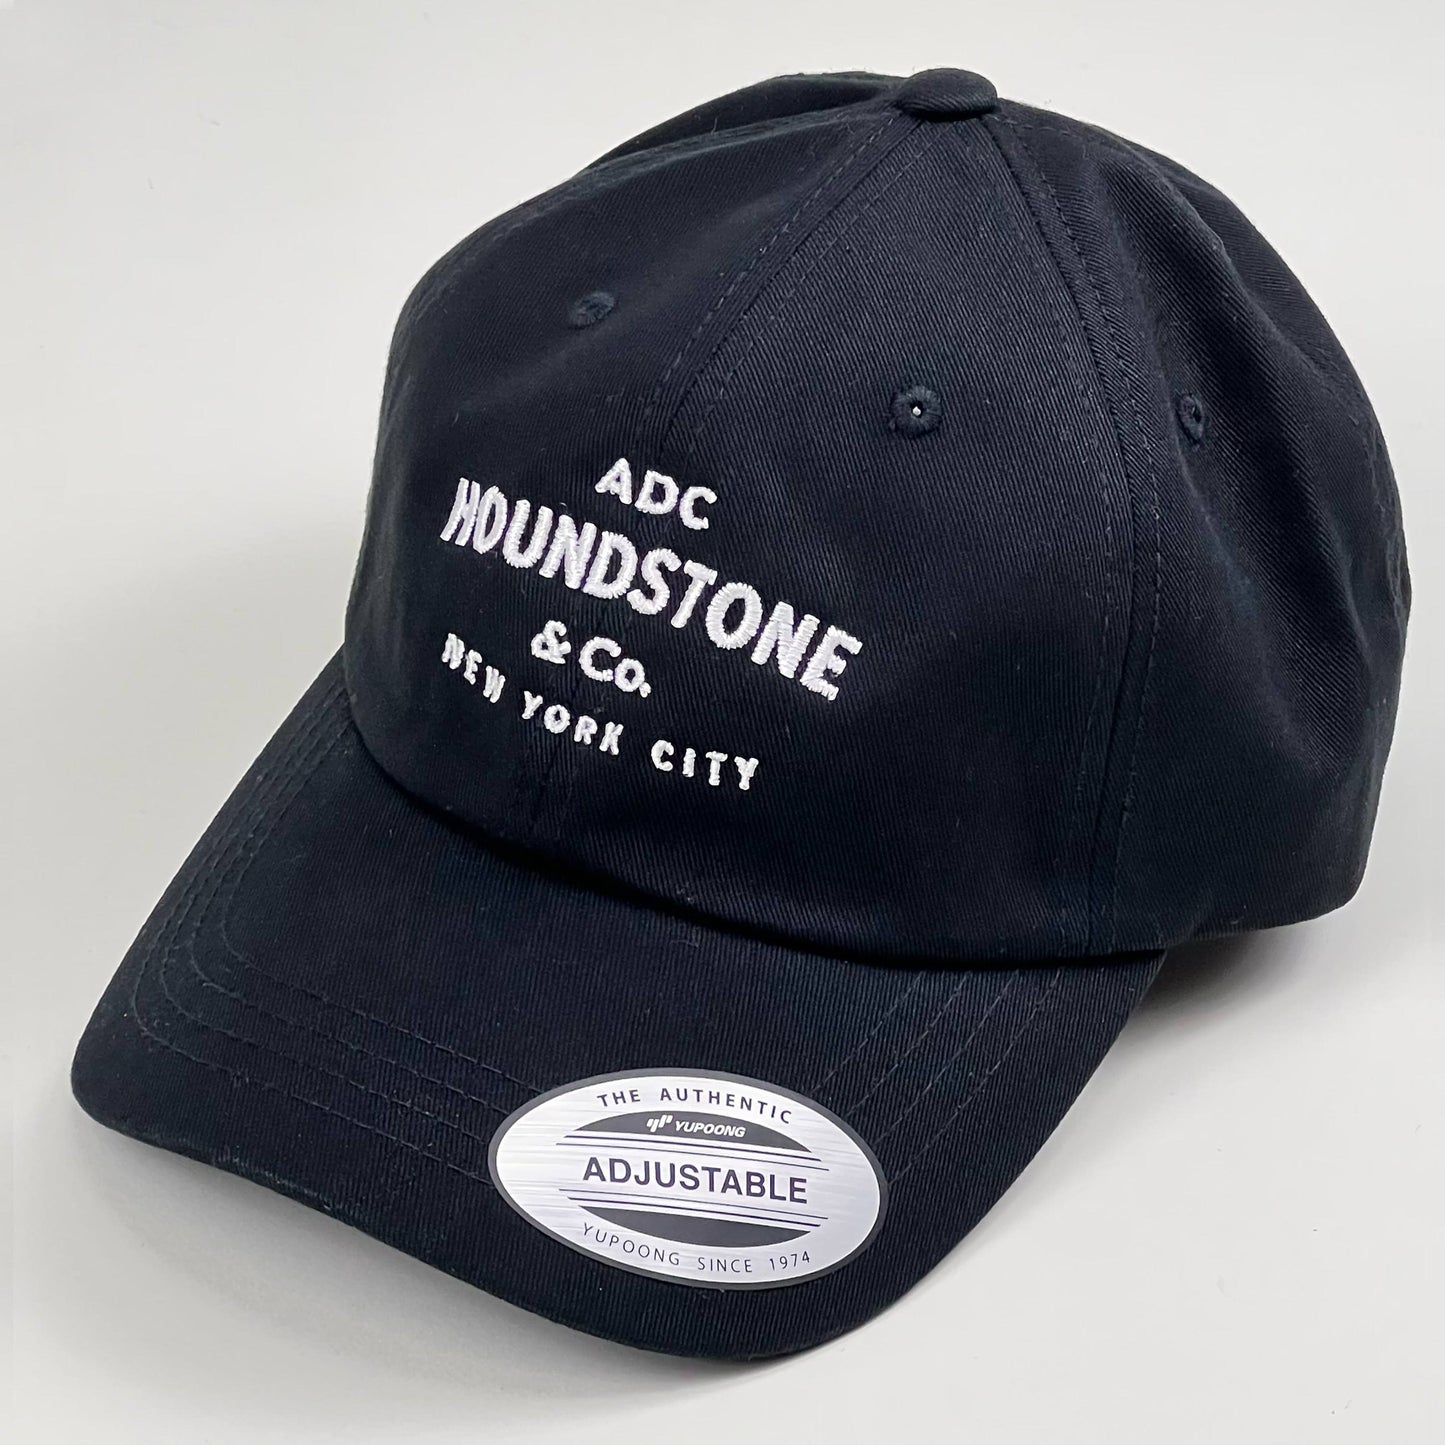 Twill, unstructured, embroidered Houndstone cap - Black